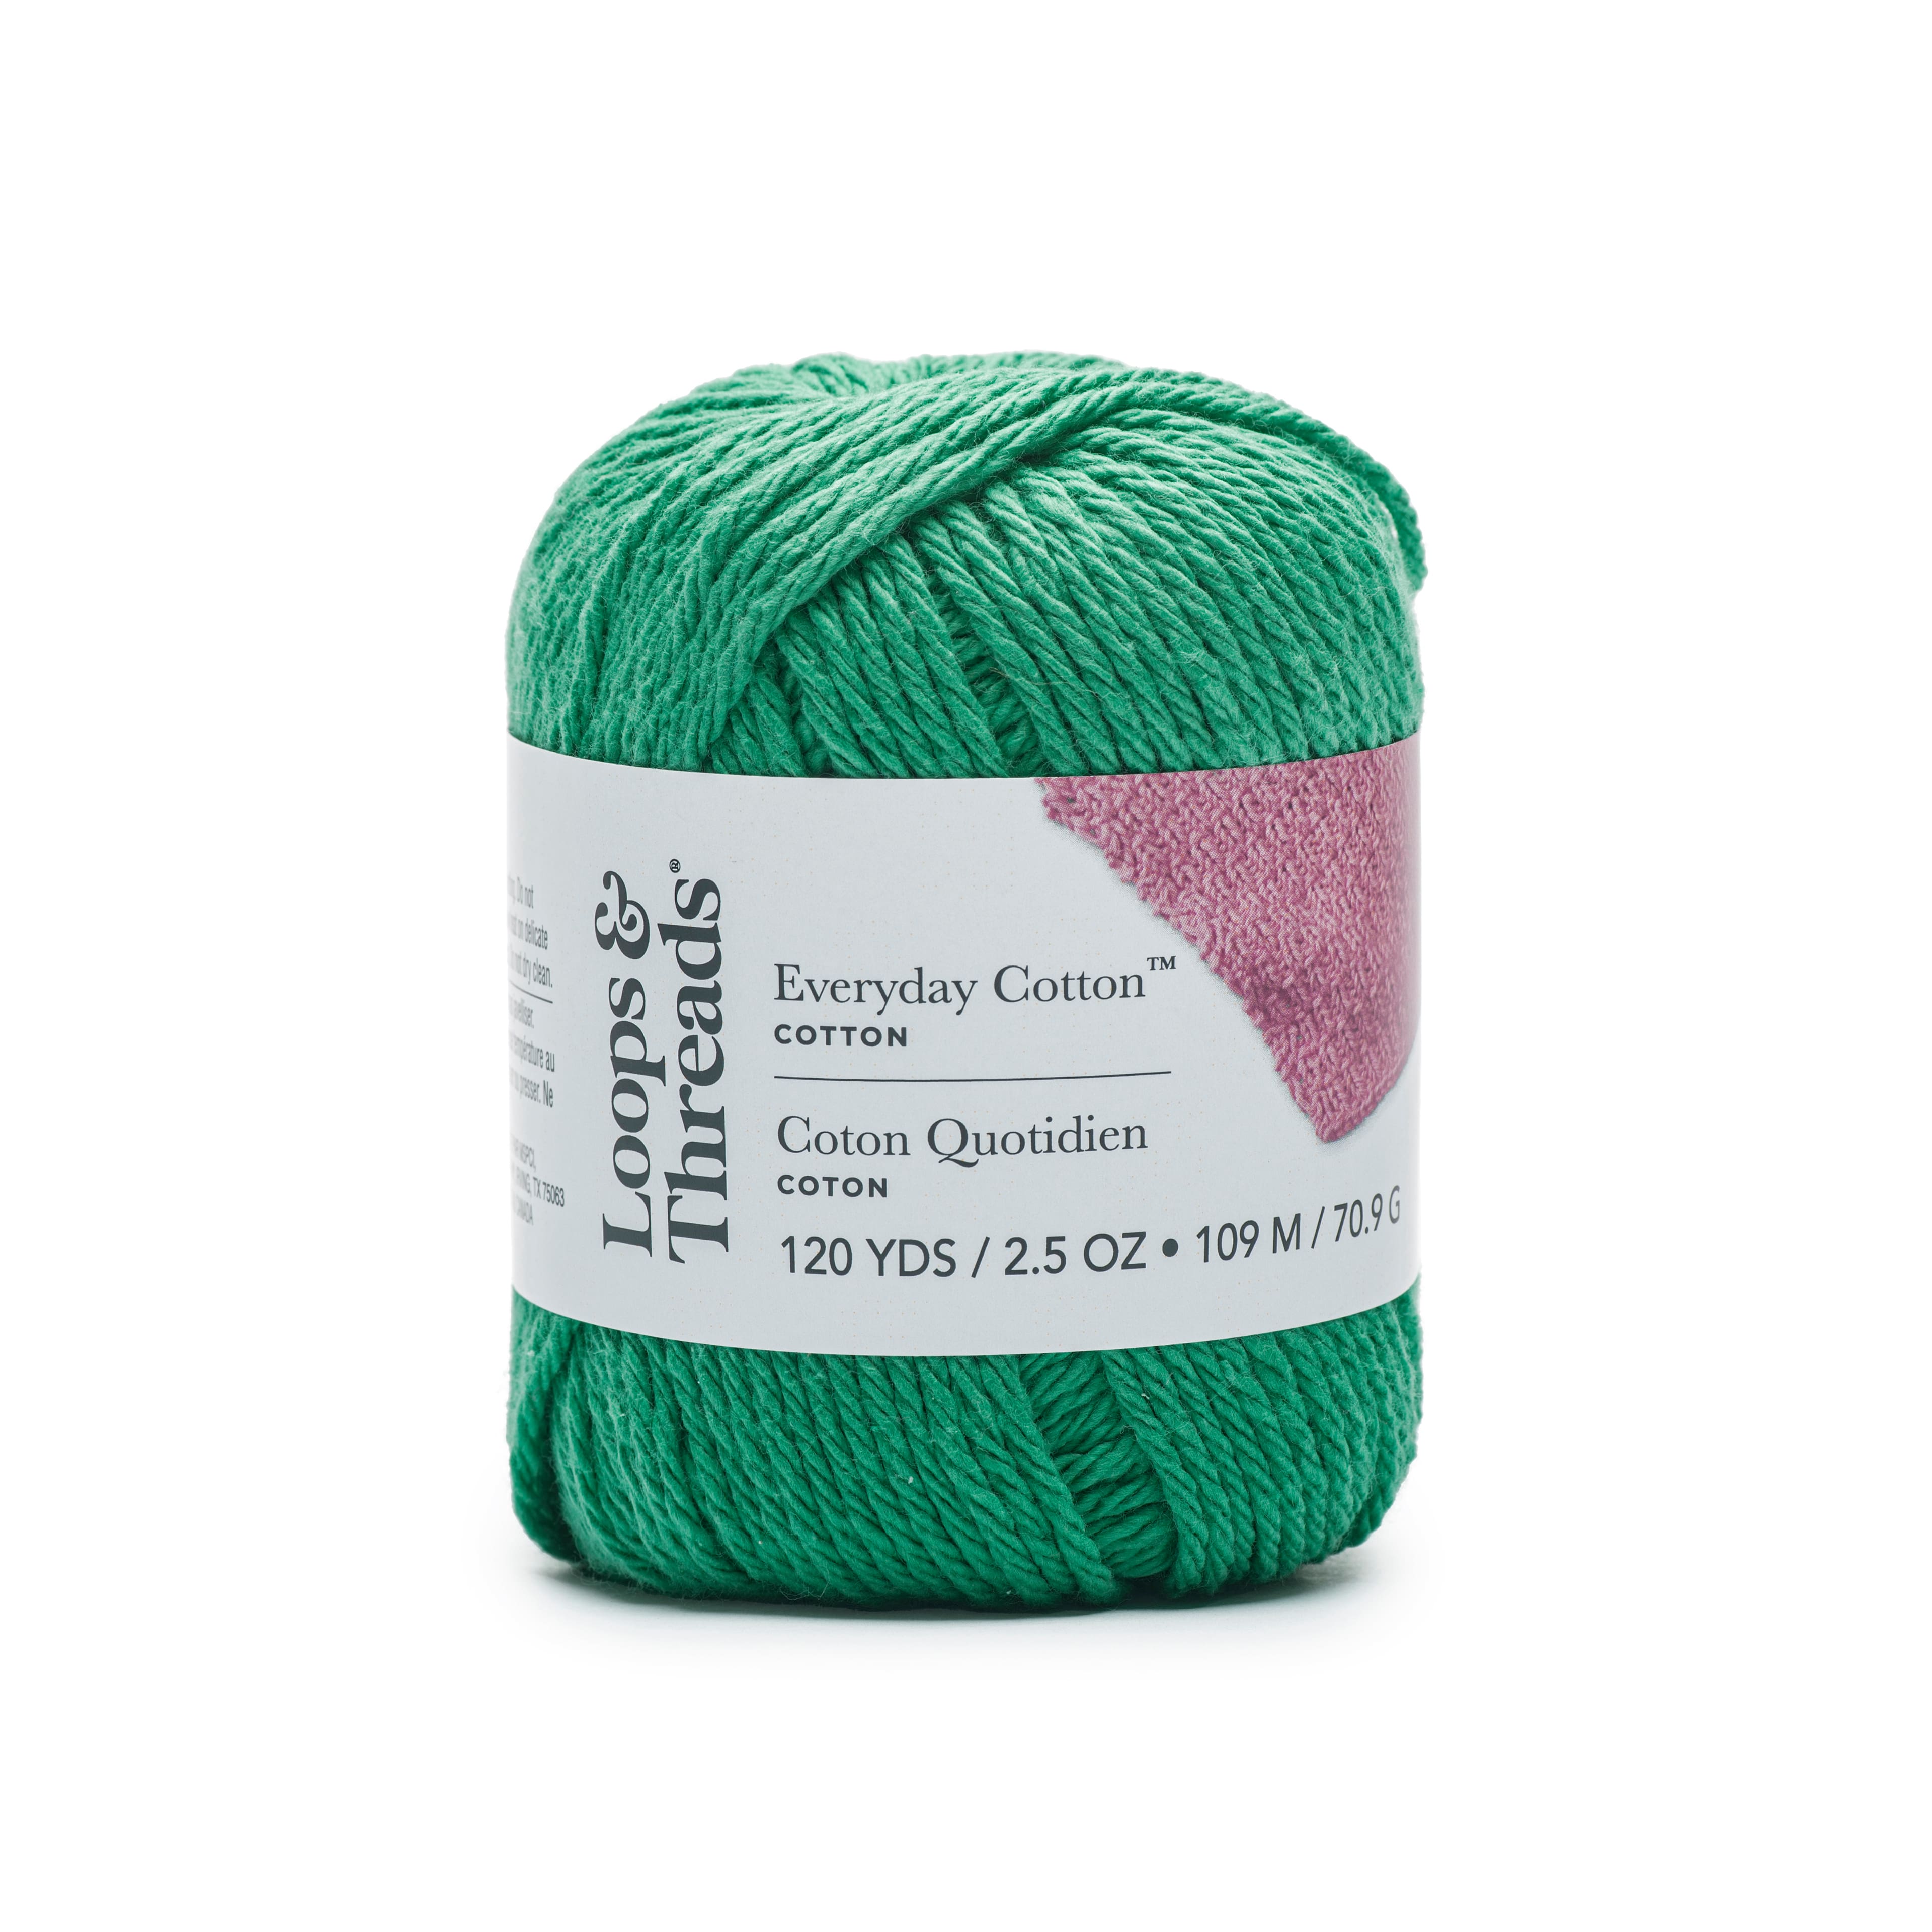 100% Cotton Yarn in Canada, Free Shipping at